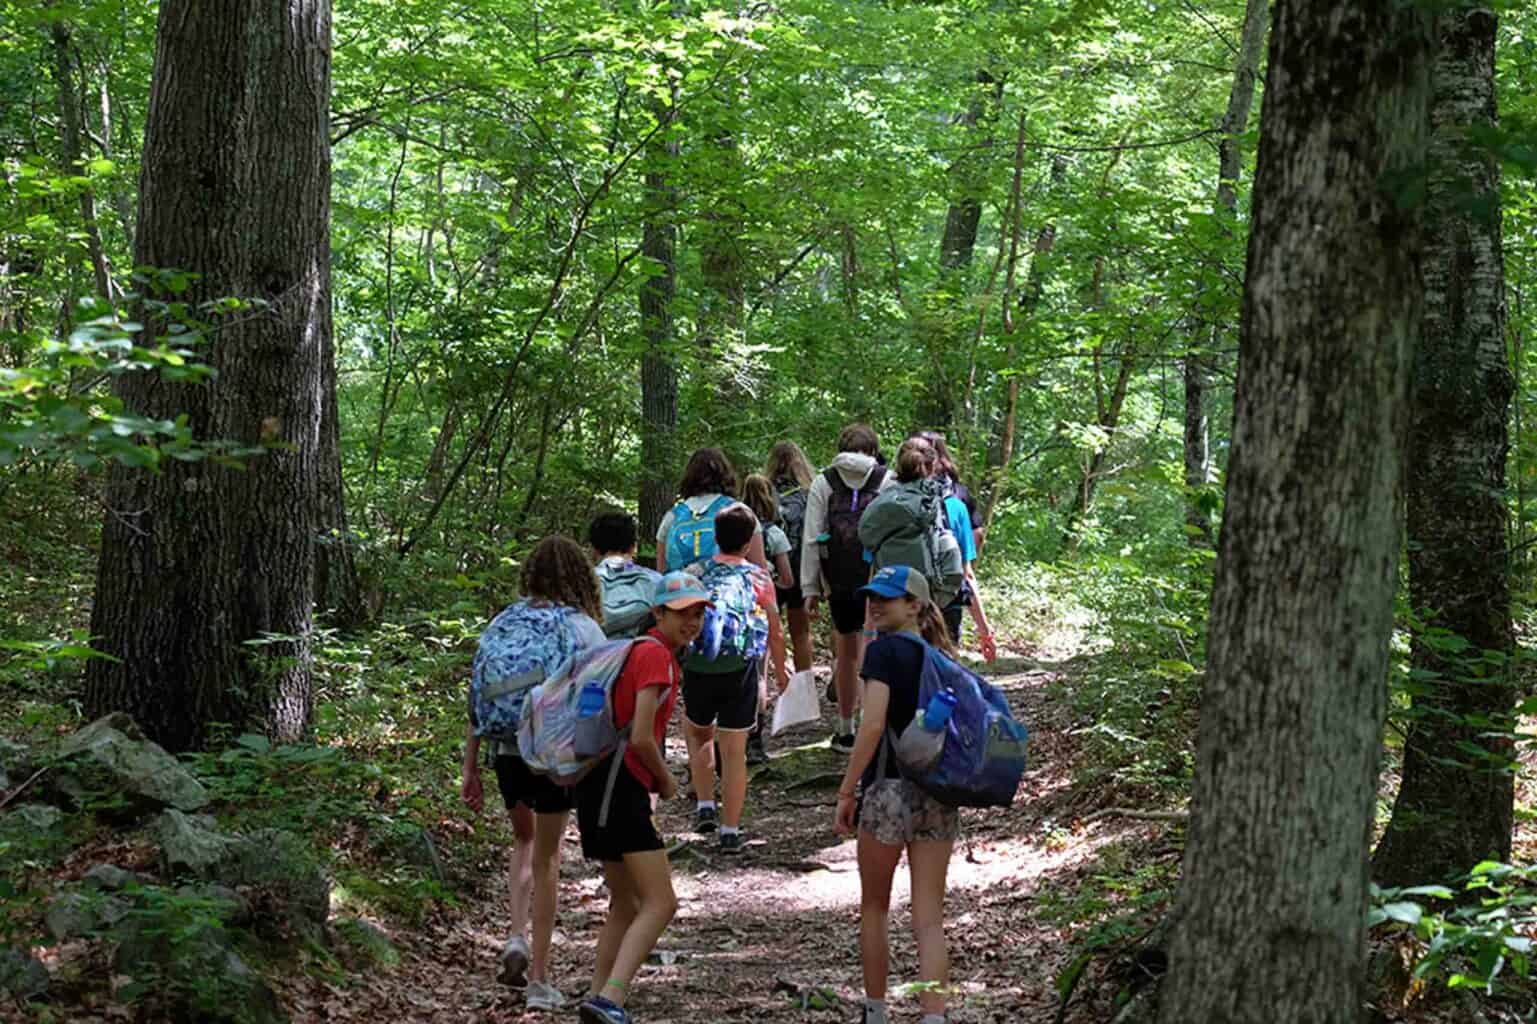 Campers hiking through woods.